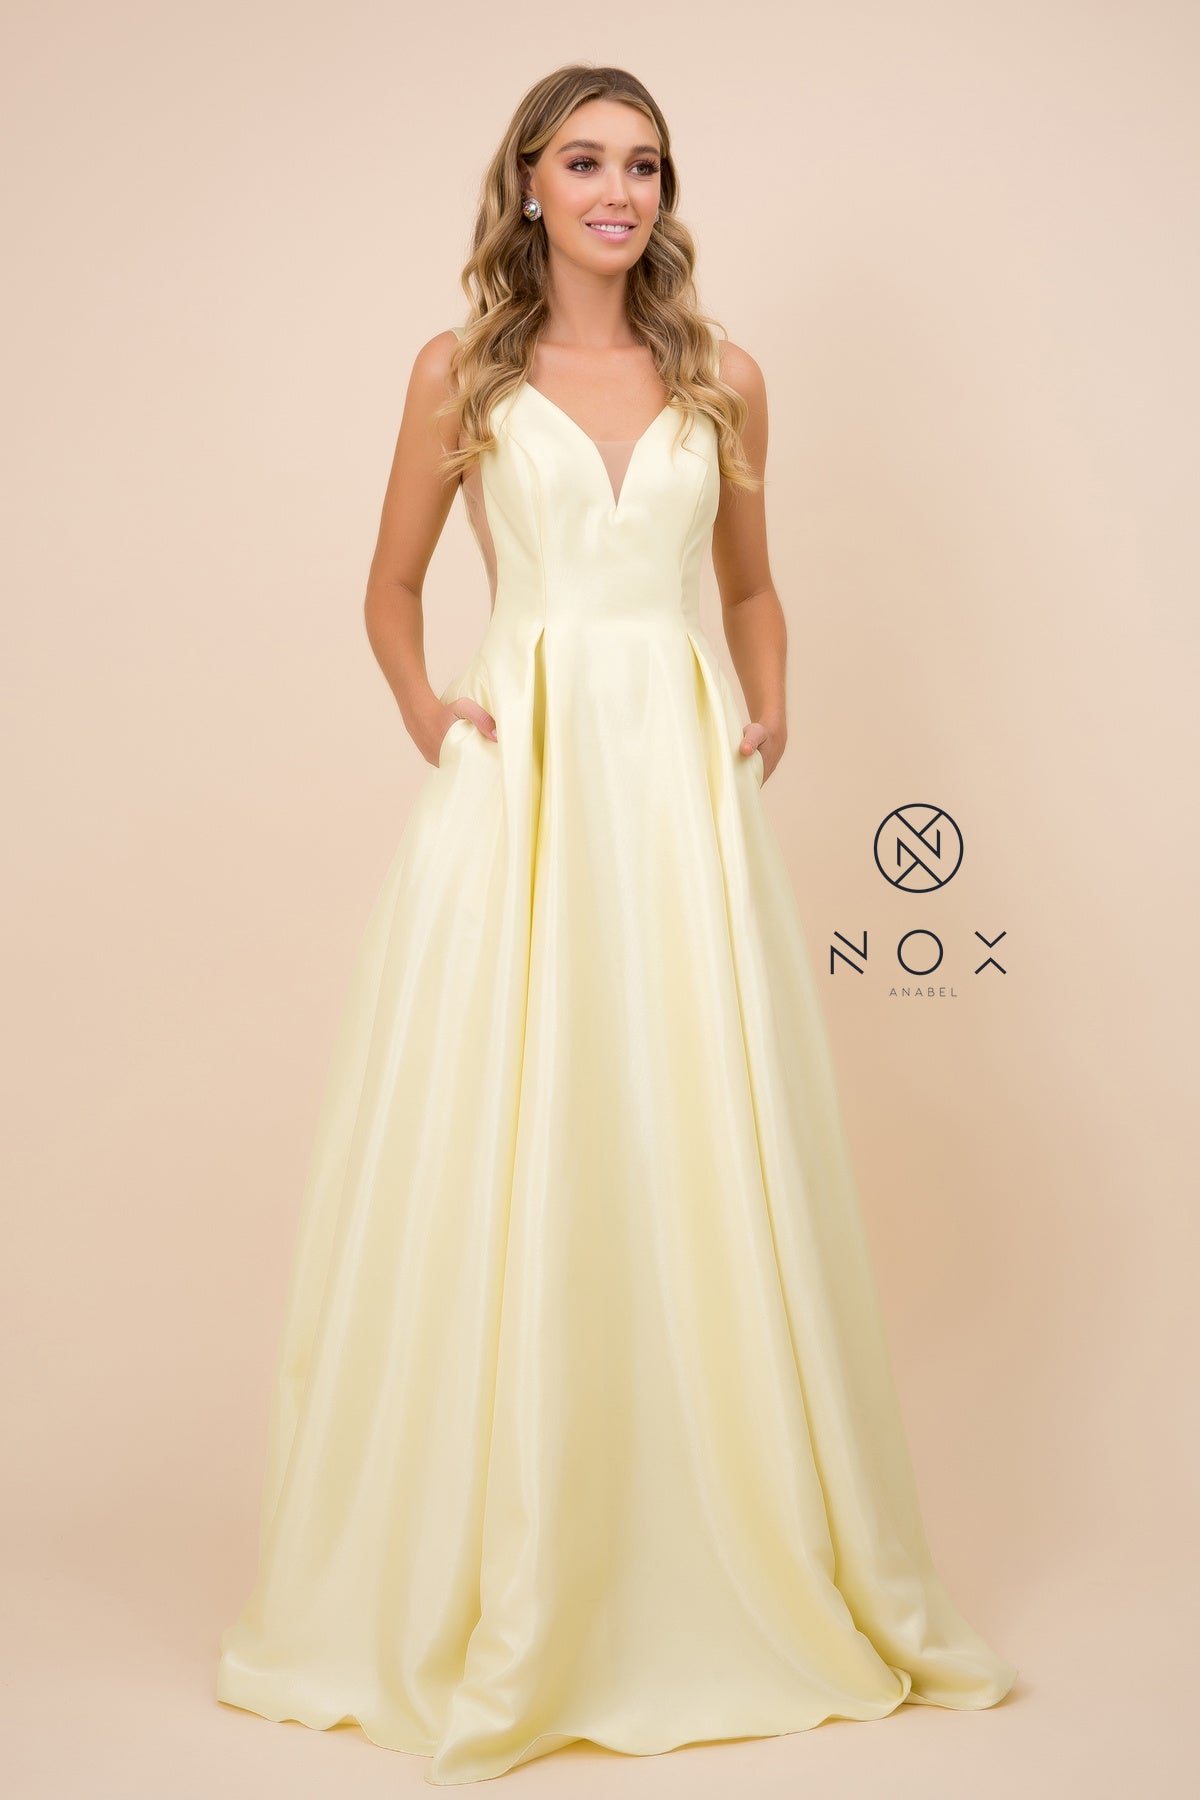 MyFashion.com - LONG AND FULL A-LINE GOWN WITH SHEER SIDE CUT OUTS. (E156) - Nox Anabel promdress eveningdress fashion partydress weddingdress 
 gown homecoming promgown weddinggown 